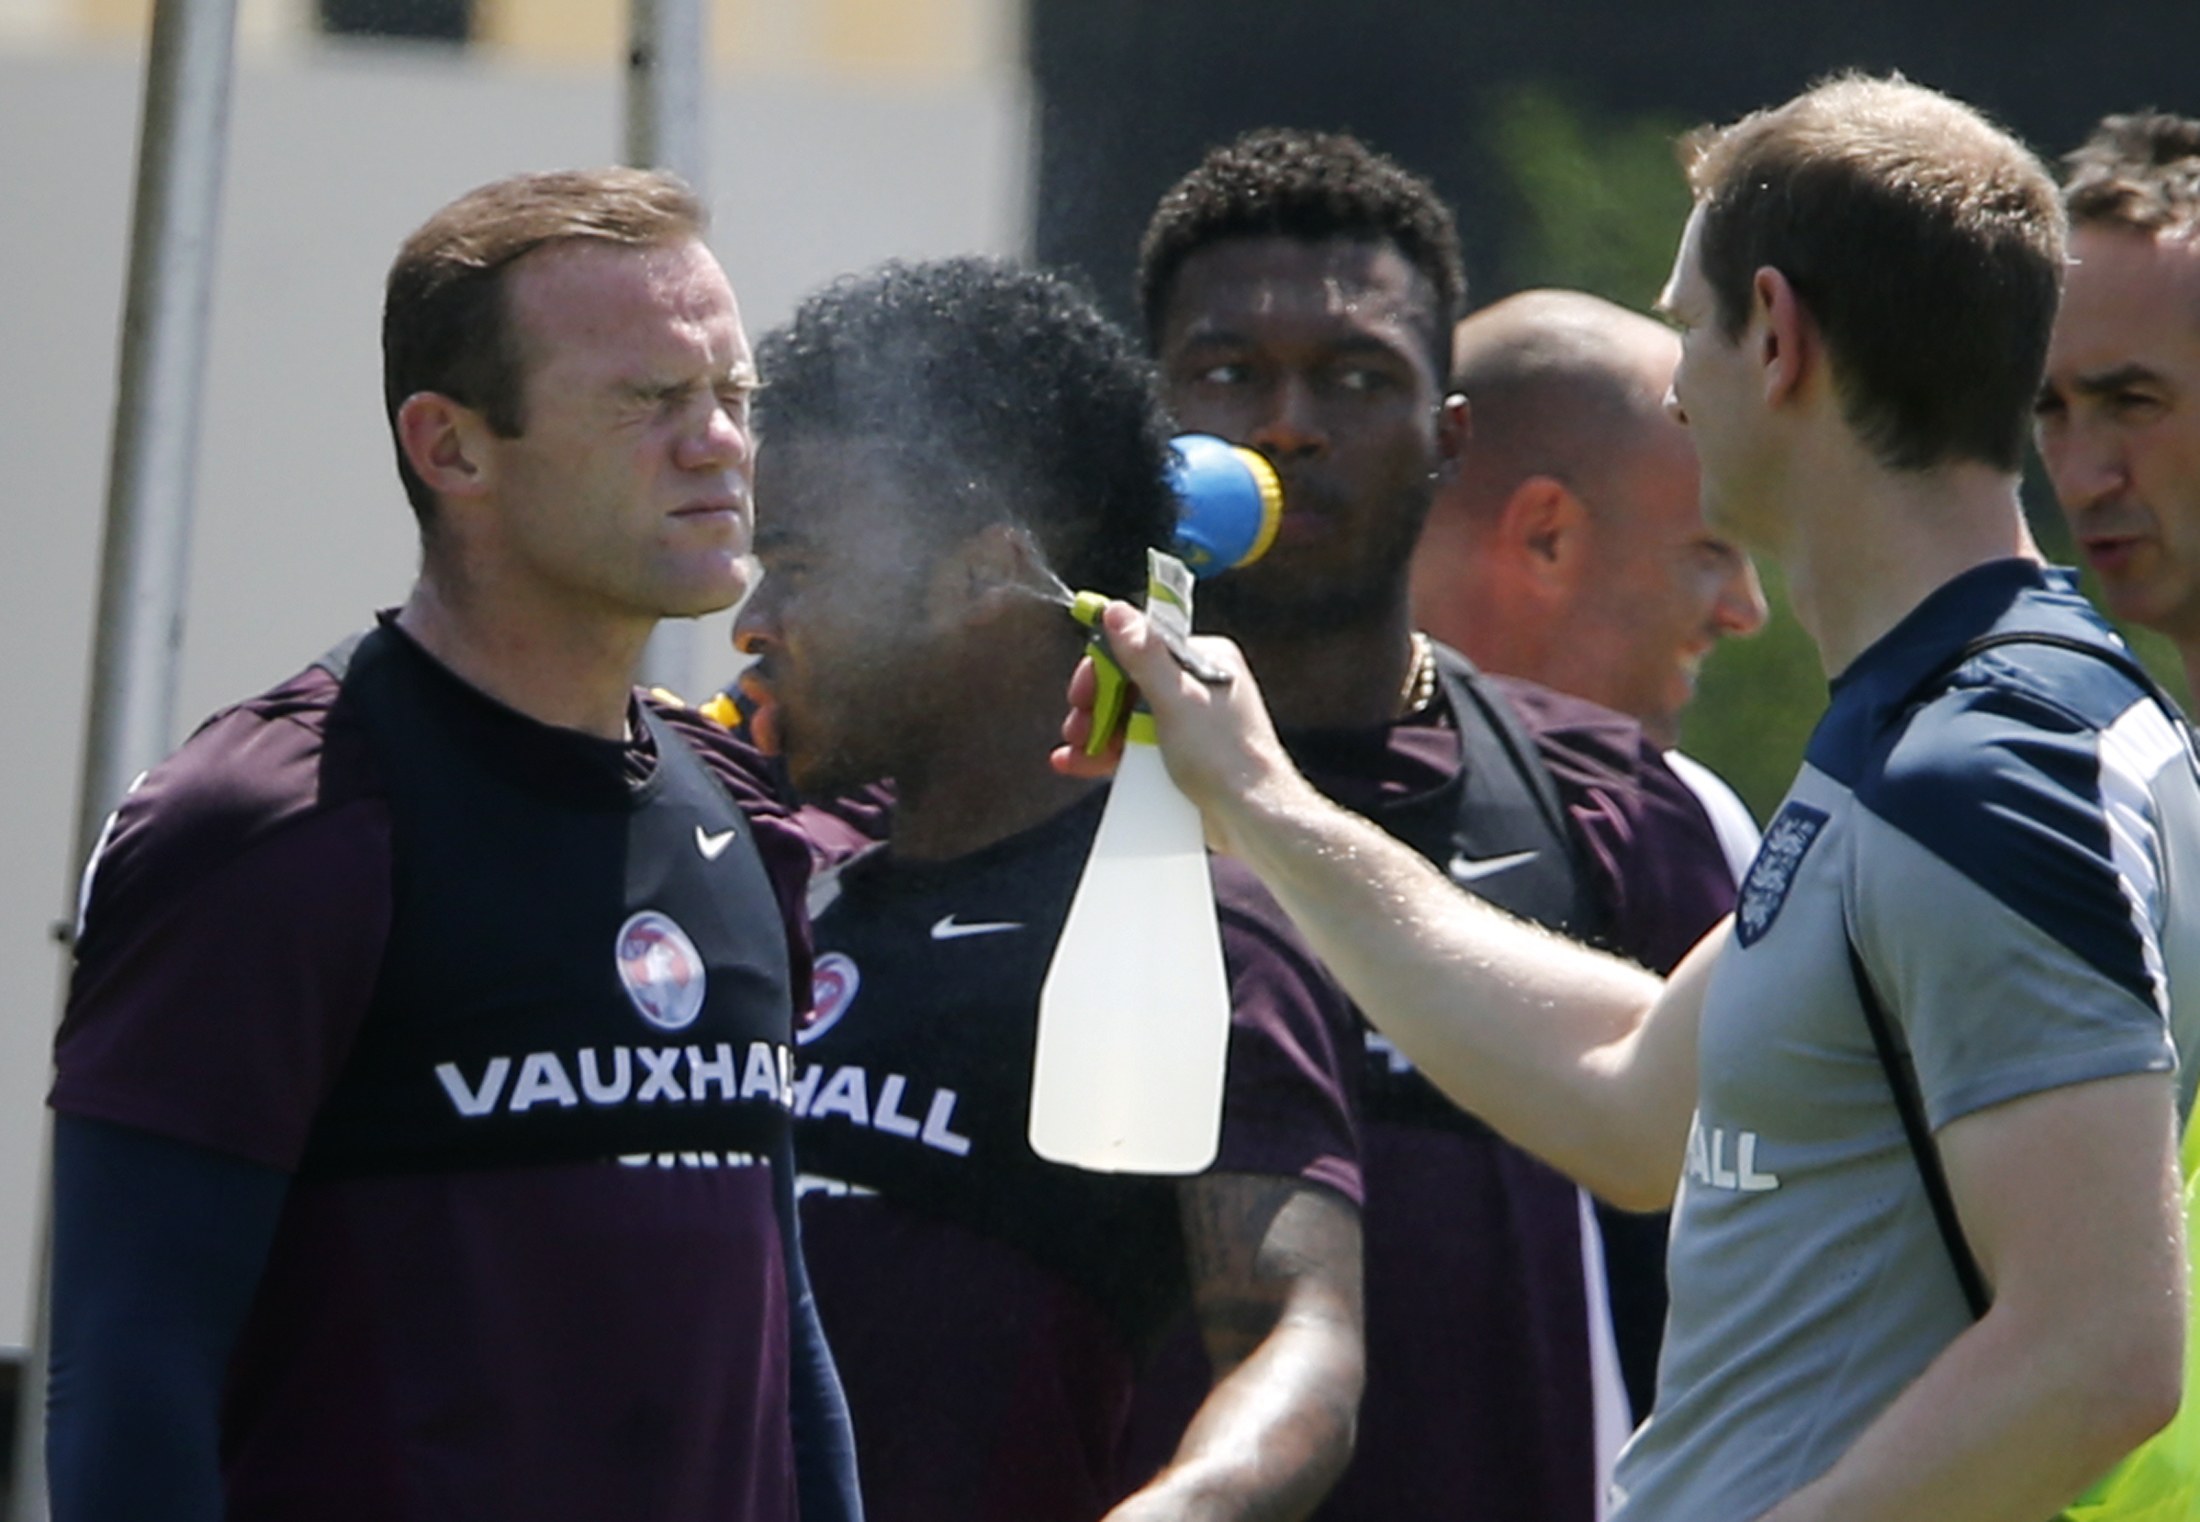 England's Wayne Rooney (L) is sprayed with water for cooling down as Raheem Sterling (2nd L) and Daniel Sturridge (3rd L) look on during a training session of the England soccer squad ahead of the 2014 World Cup in Miami June 6, 2014.  REUTERS/Wolfgang Ra